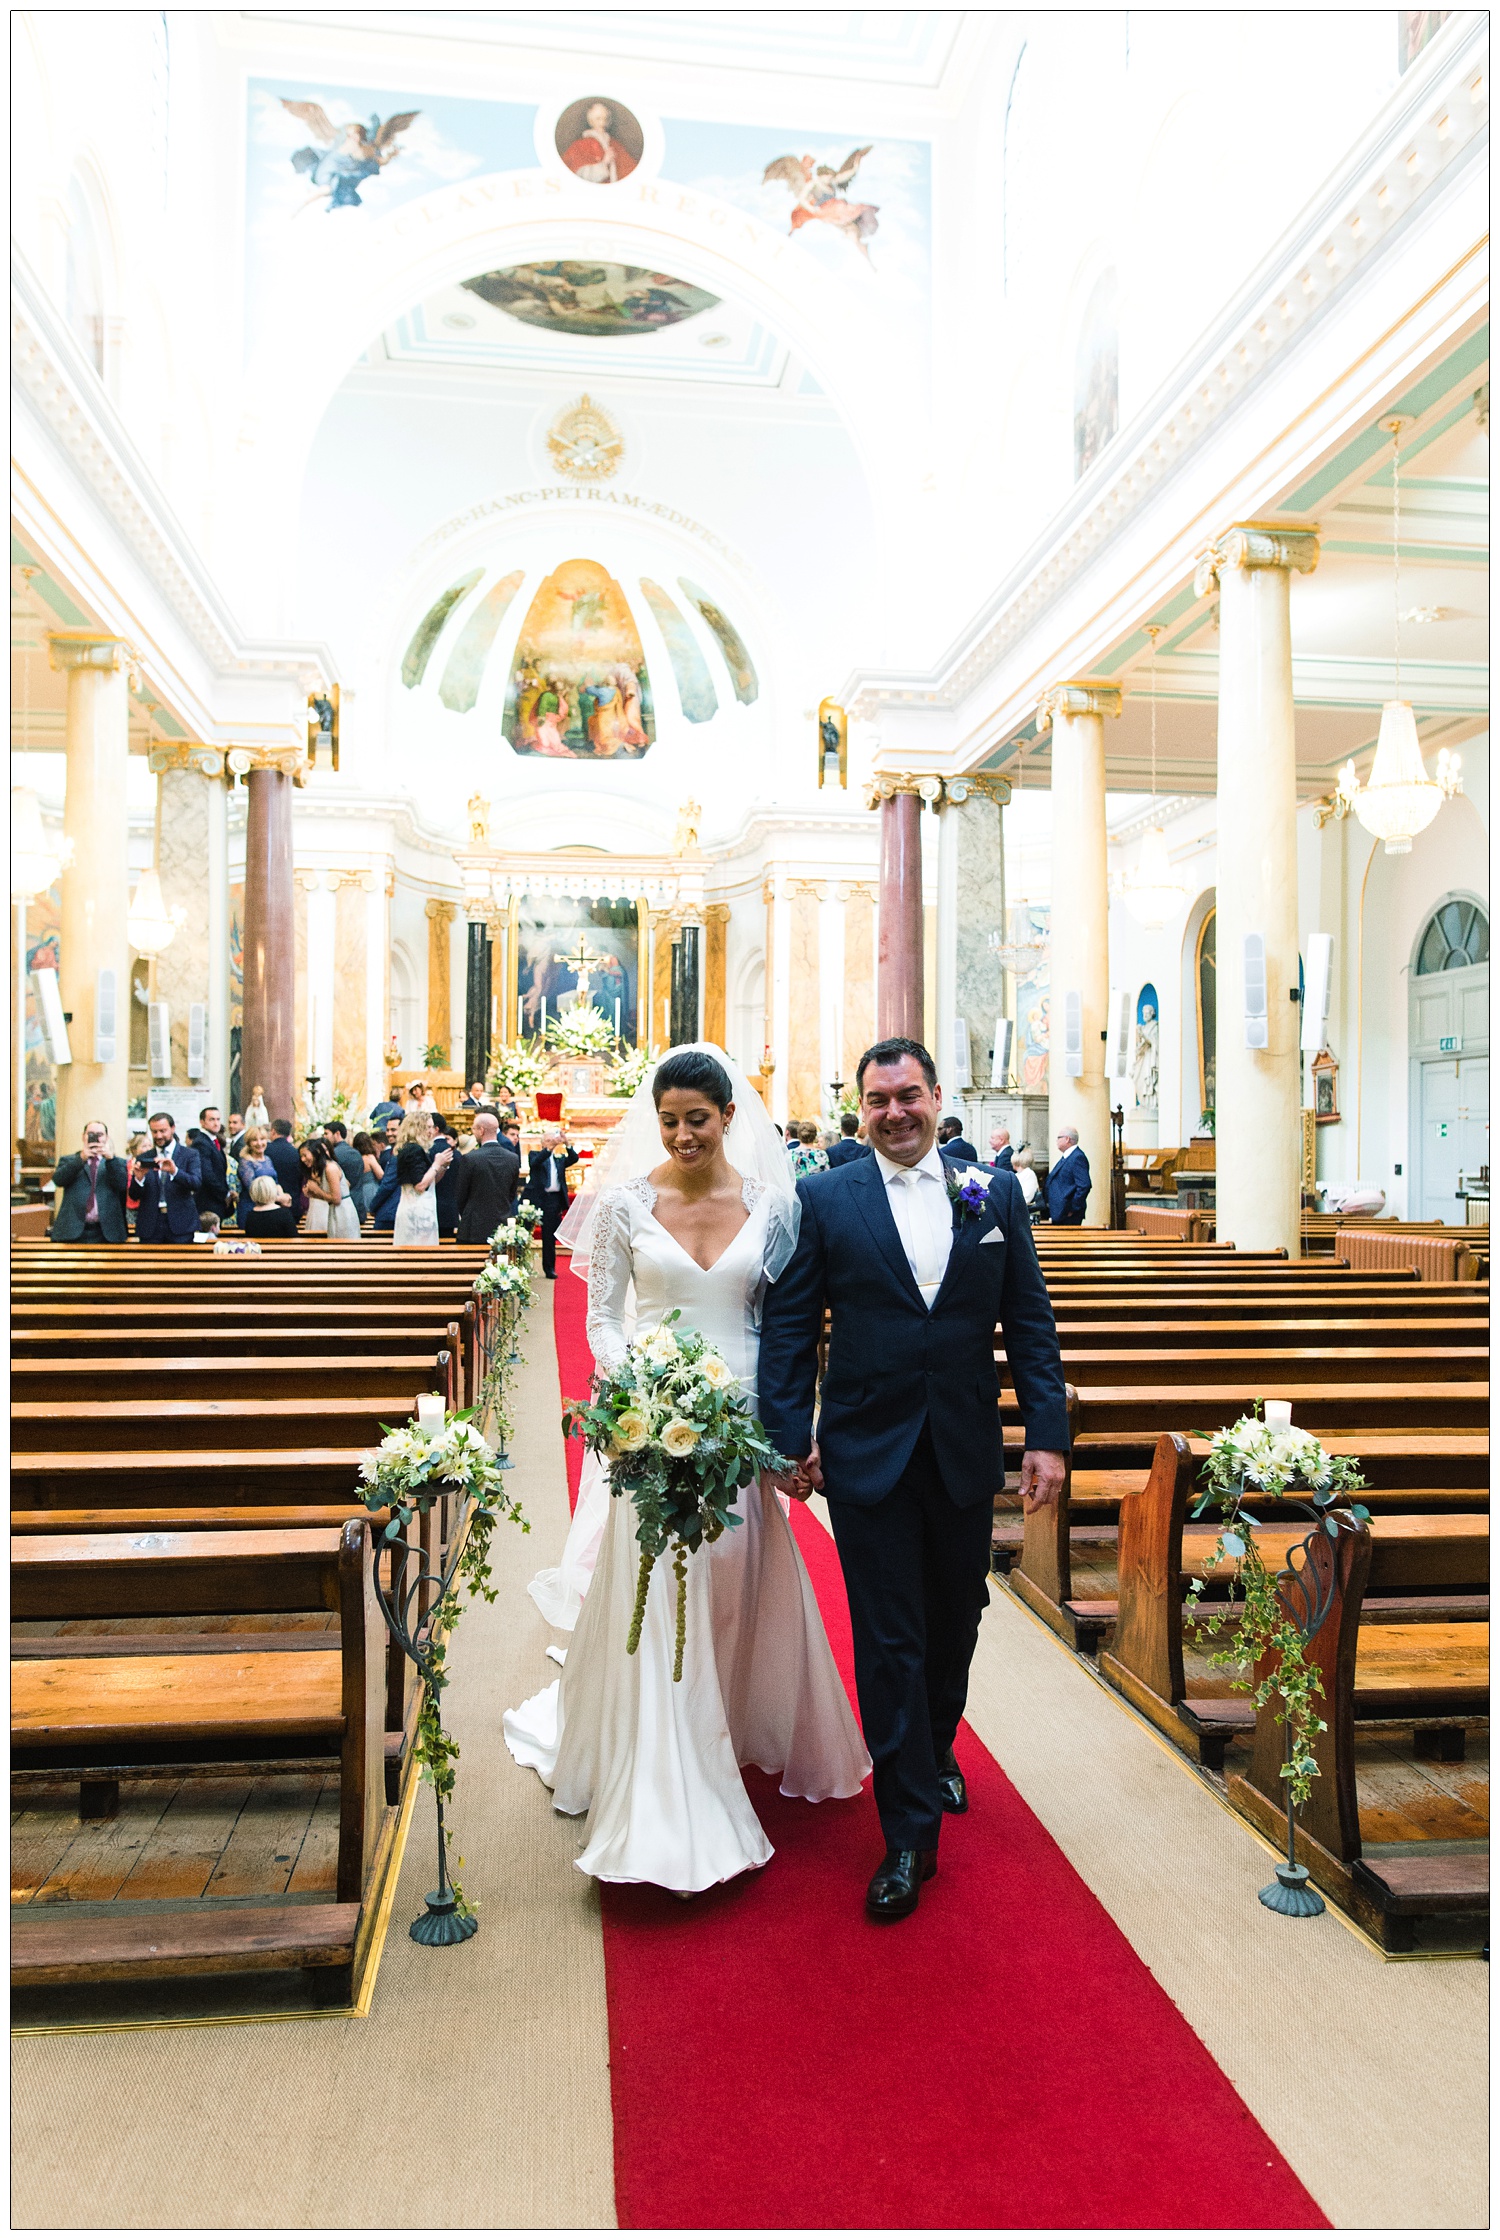 Woman and a man walking down the aisle after getting married in St. Peter's Italian Church in Clerkenwell.